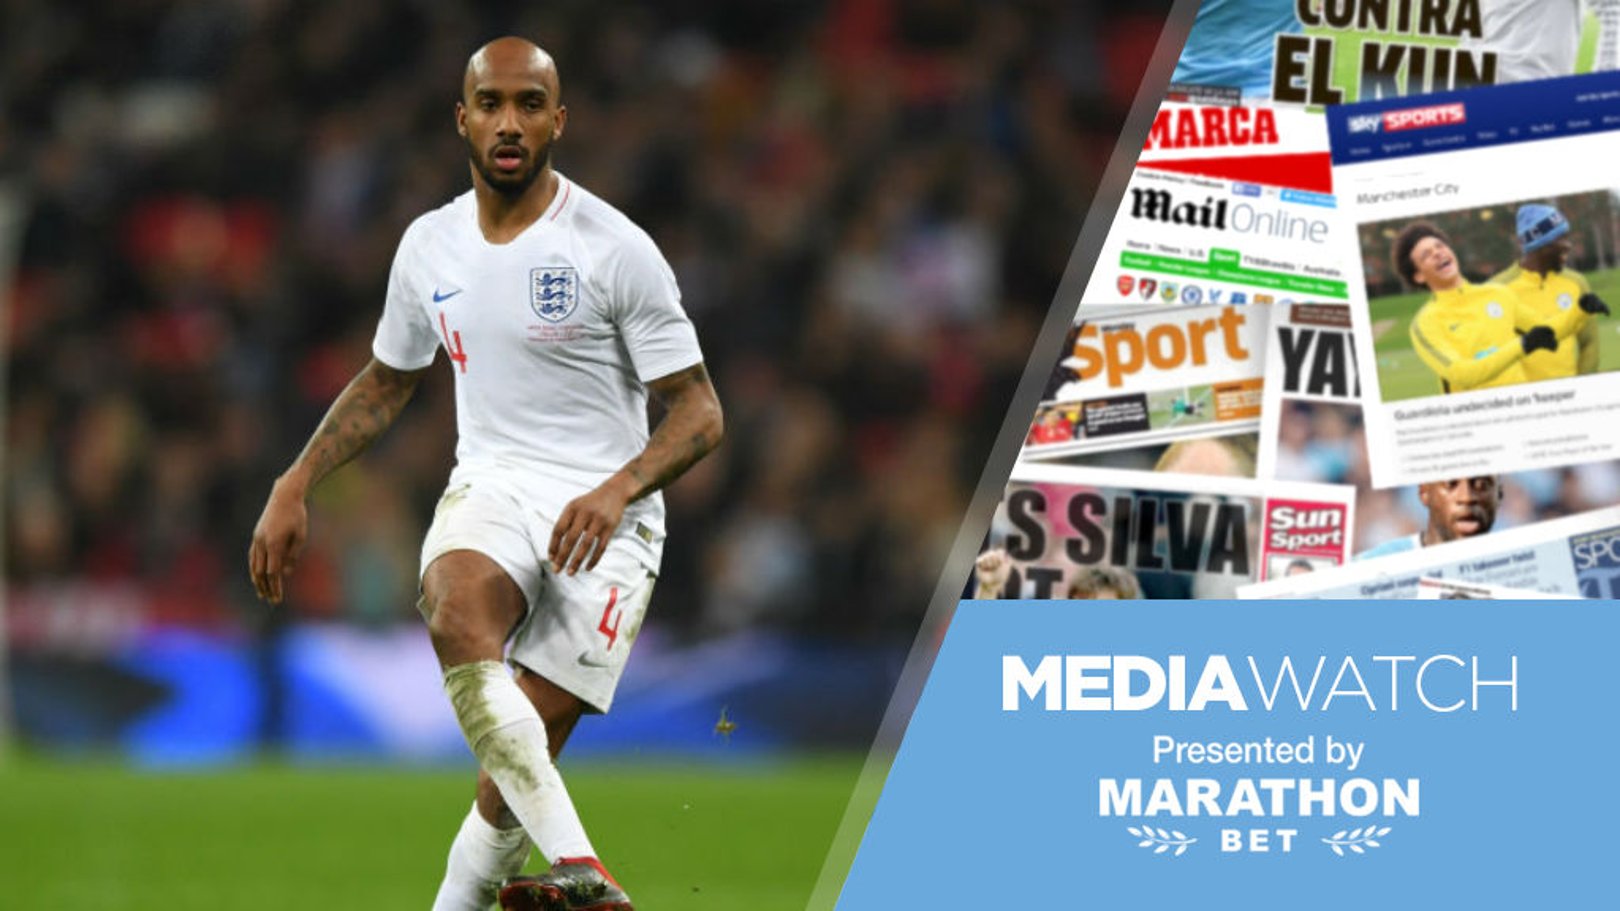 LIONS PRIDE: Fabian Delph was hailed for his key role in England's excellent 2-1 UEFA Nations League win over Croatia